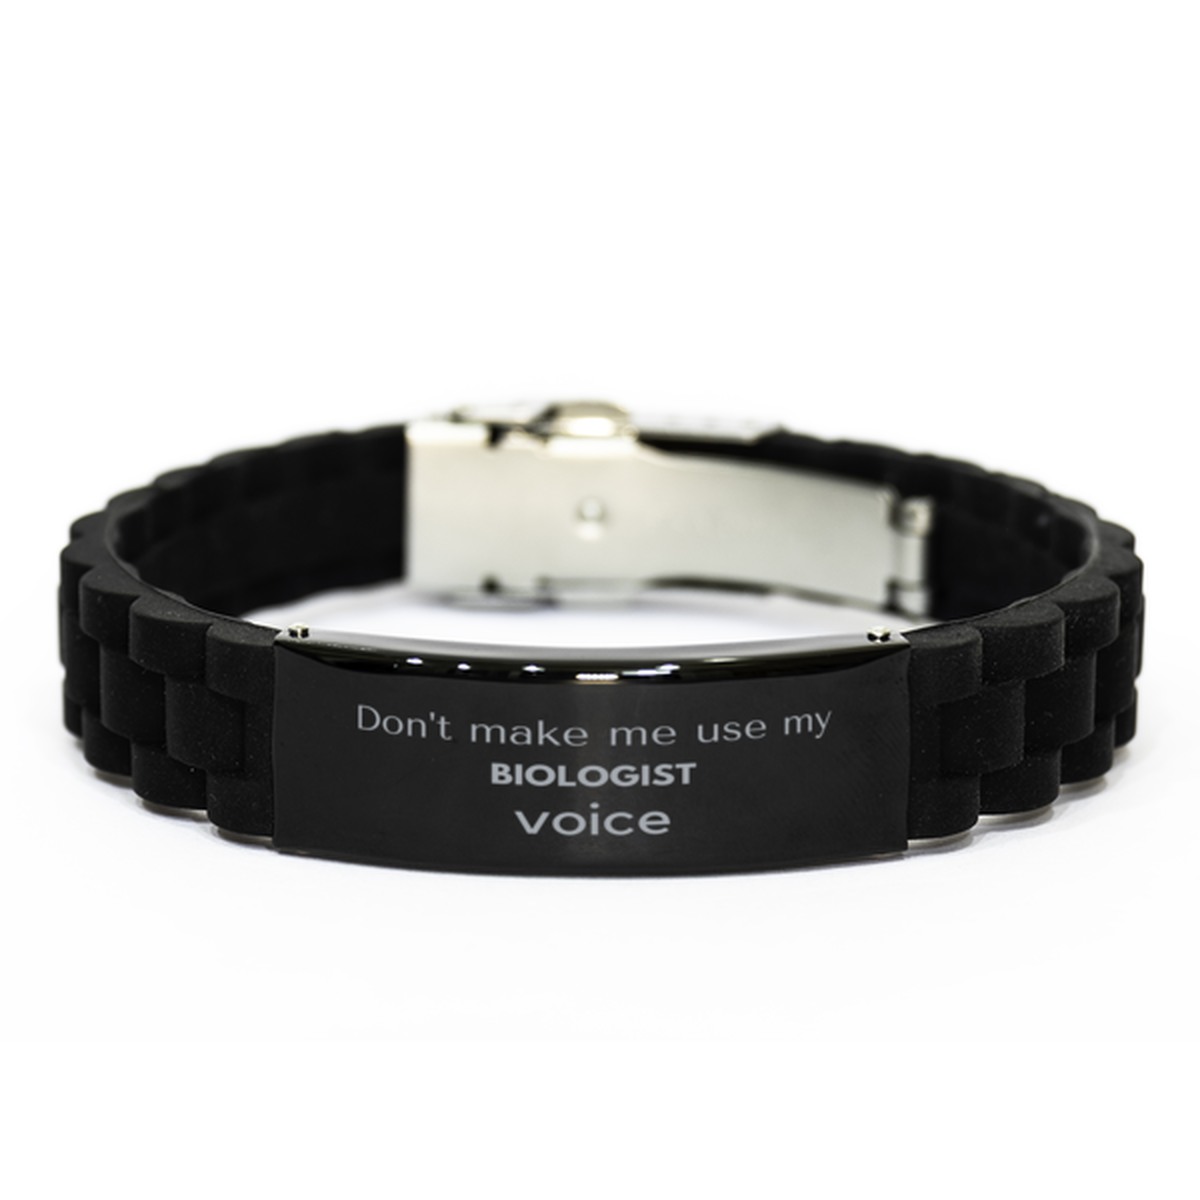 Don't make me use my Biologist voice, Sarcasm Biologist Gifts, Christmas Biologist Black Glidelock Clasp Bracelet Birthday Unique Gifts For Biologist Coworkers, Men, Women, Colleague, Friends